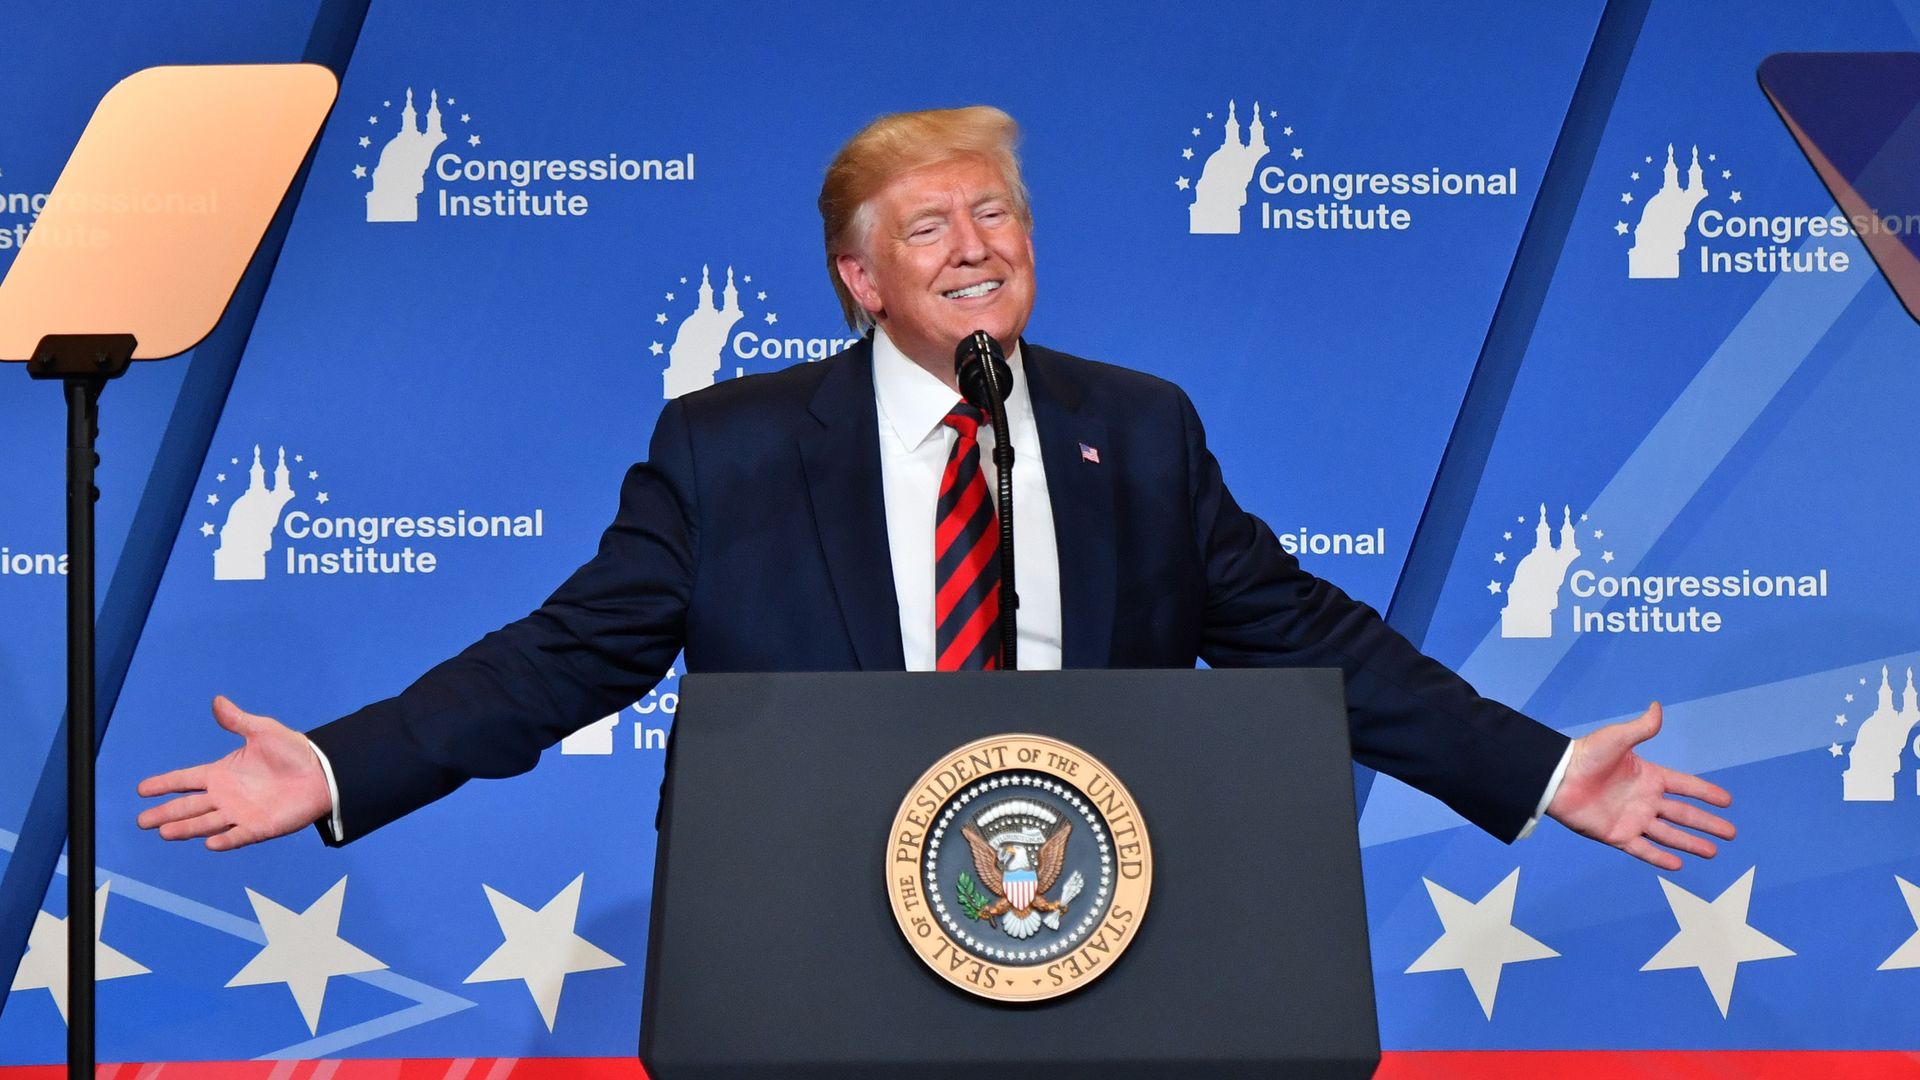  President Donald Trump delivers remarks during the 2019 House Republican Conference Member Retreat Dinner in Baltimore, Maryland on September 12